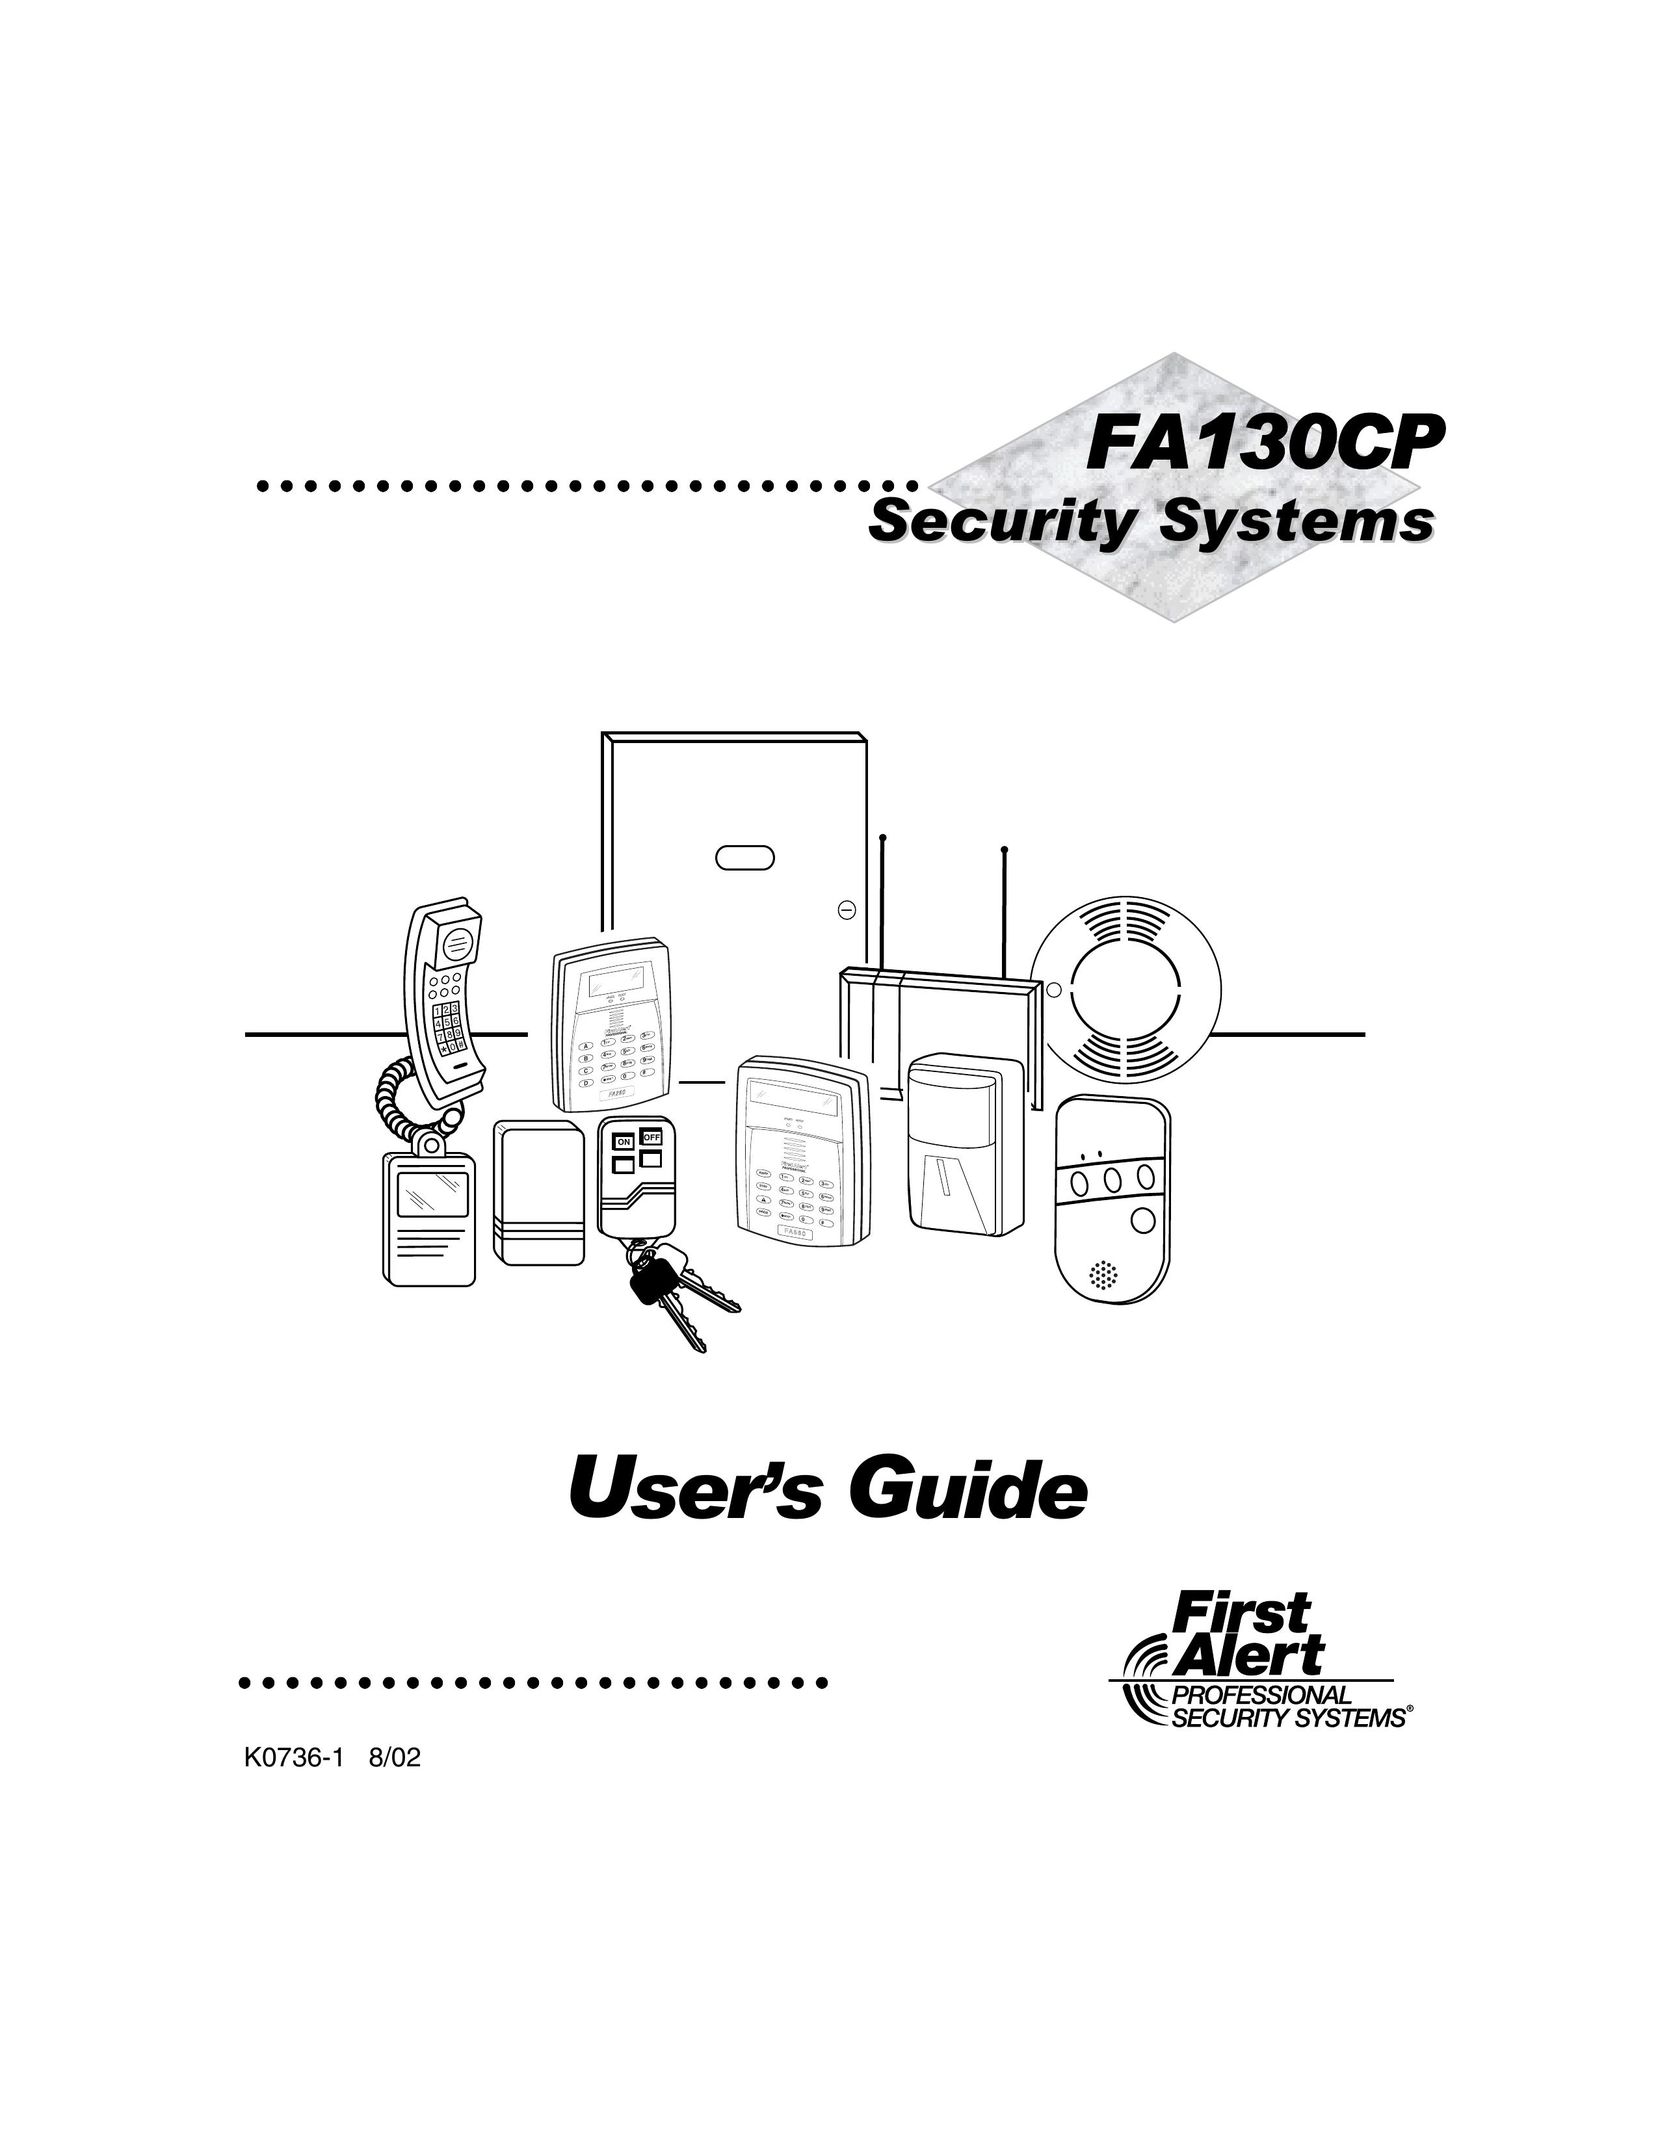 First Alert FA130CP Home Security System User Manual